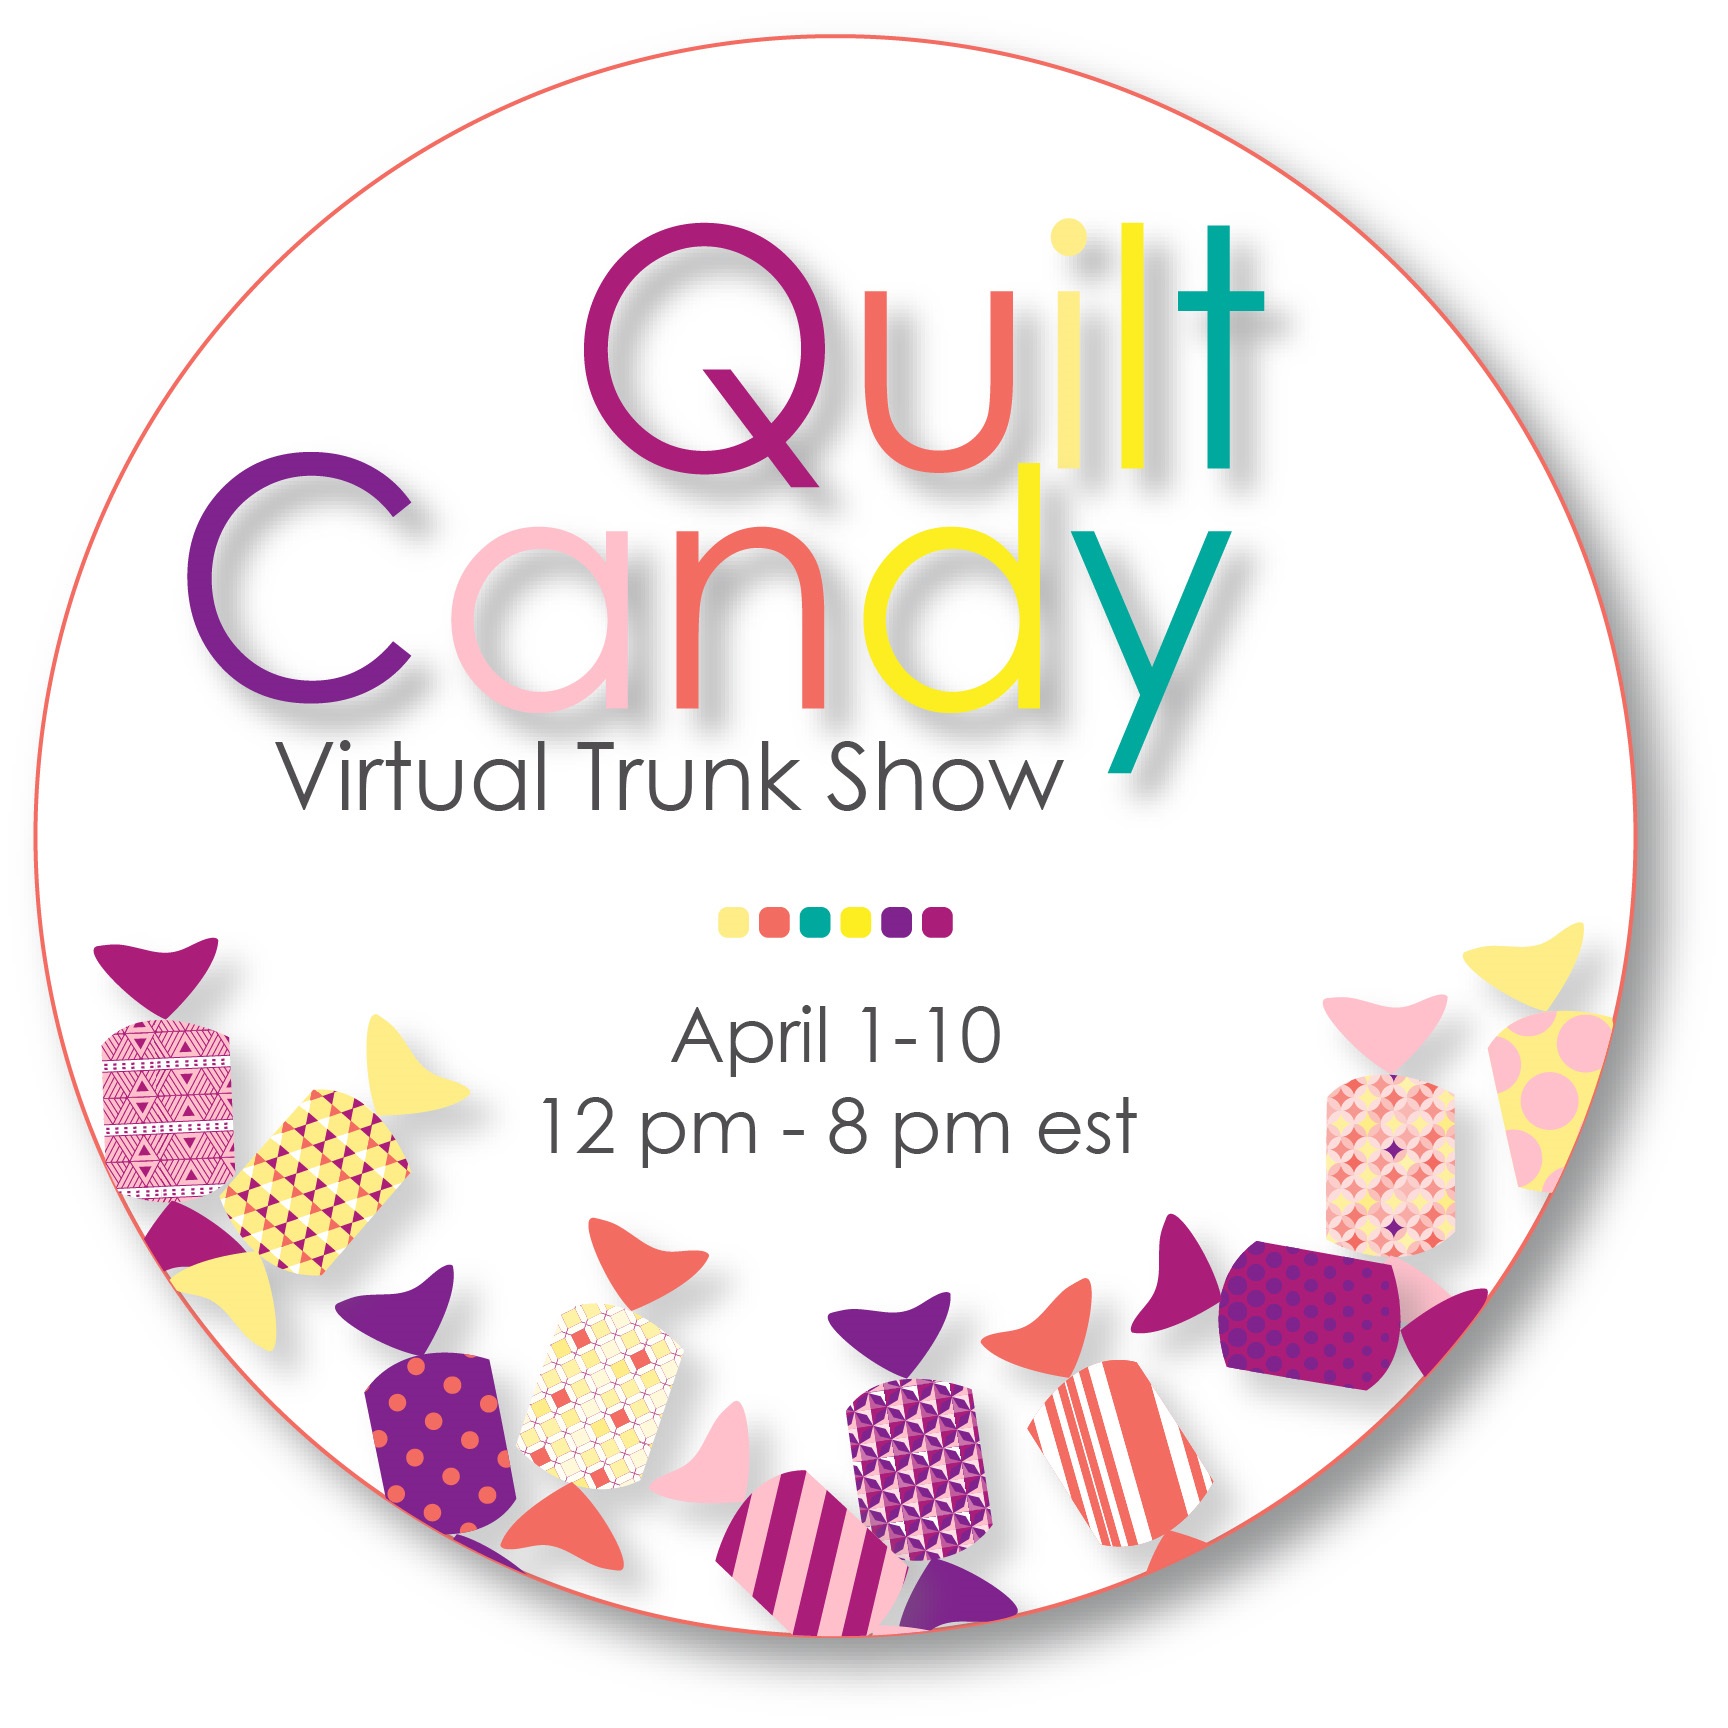 Quilter's Candy Virtual Trunk Show